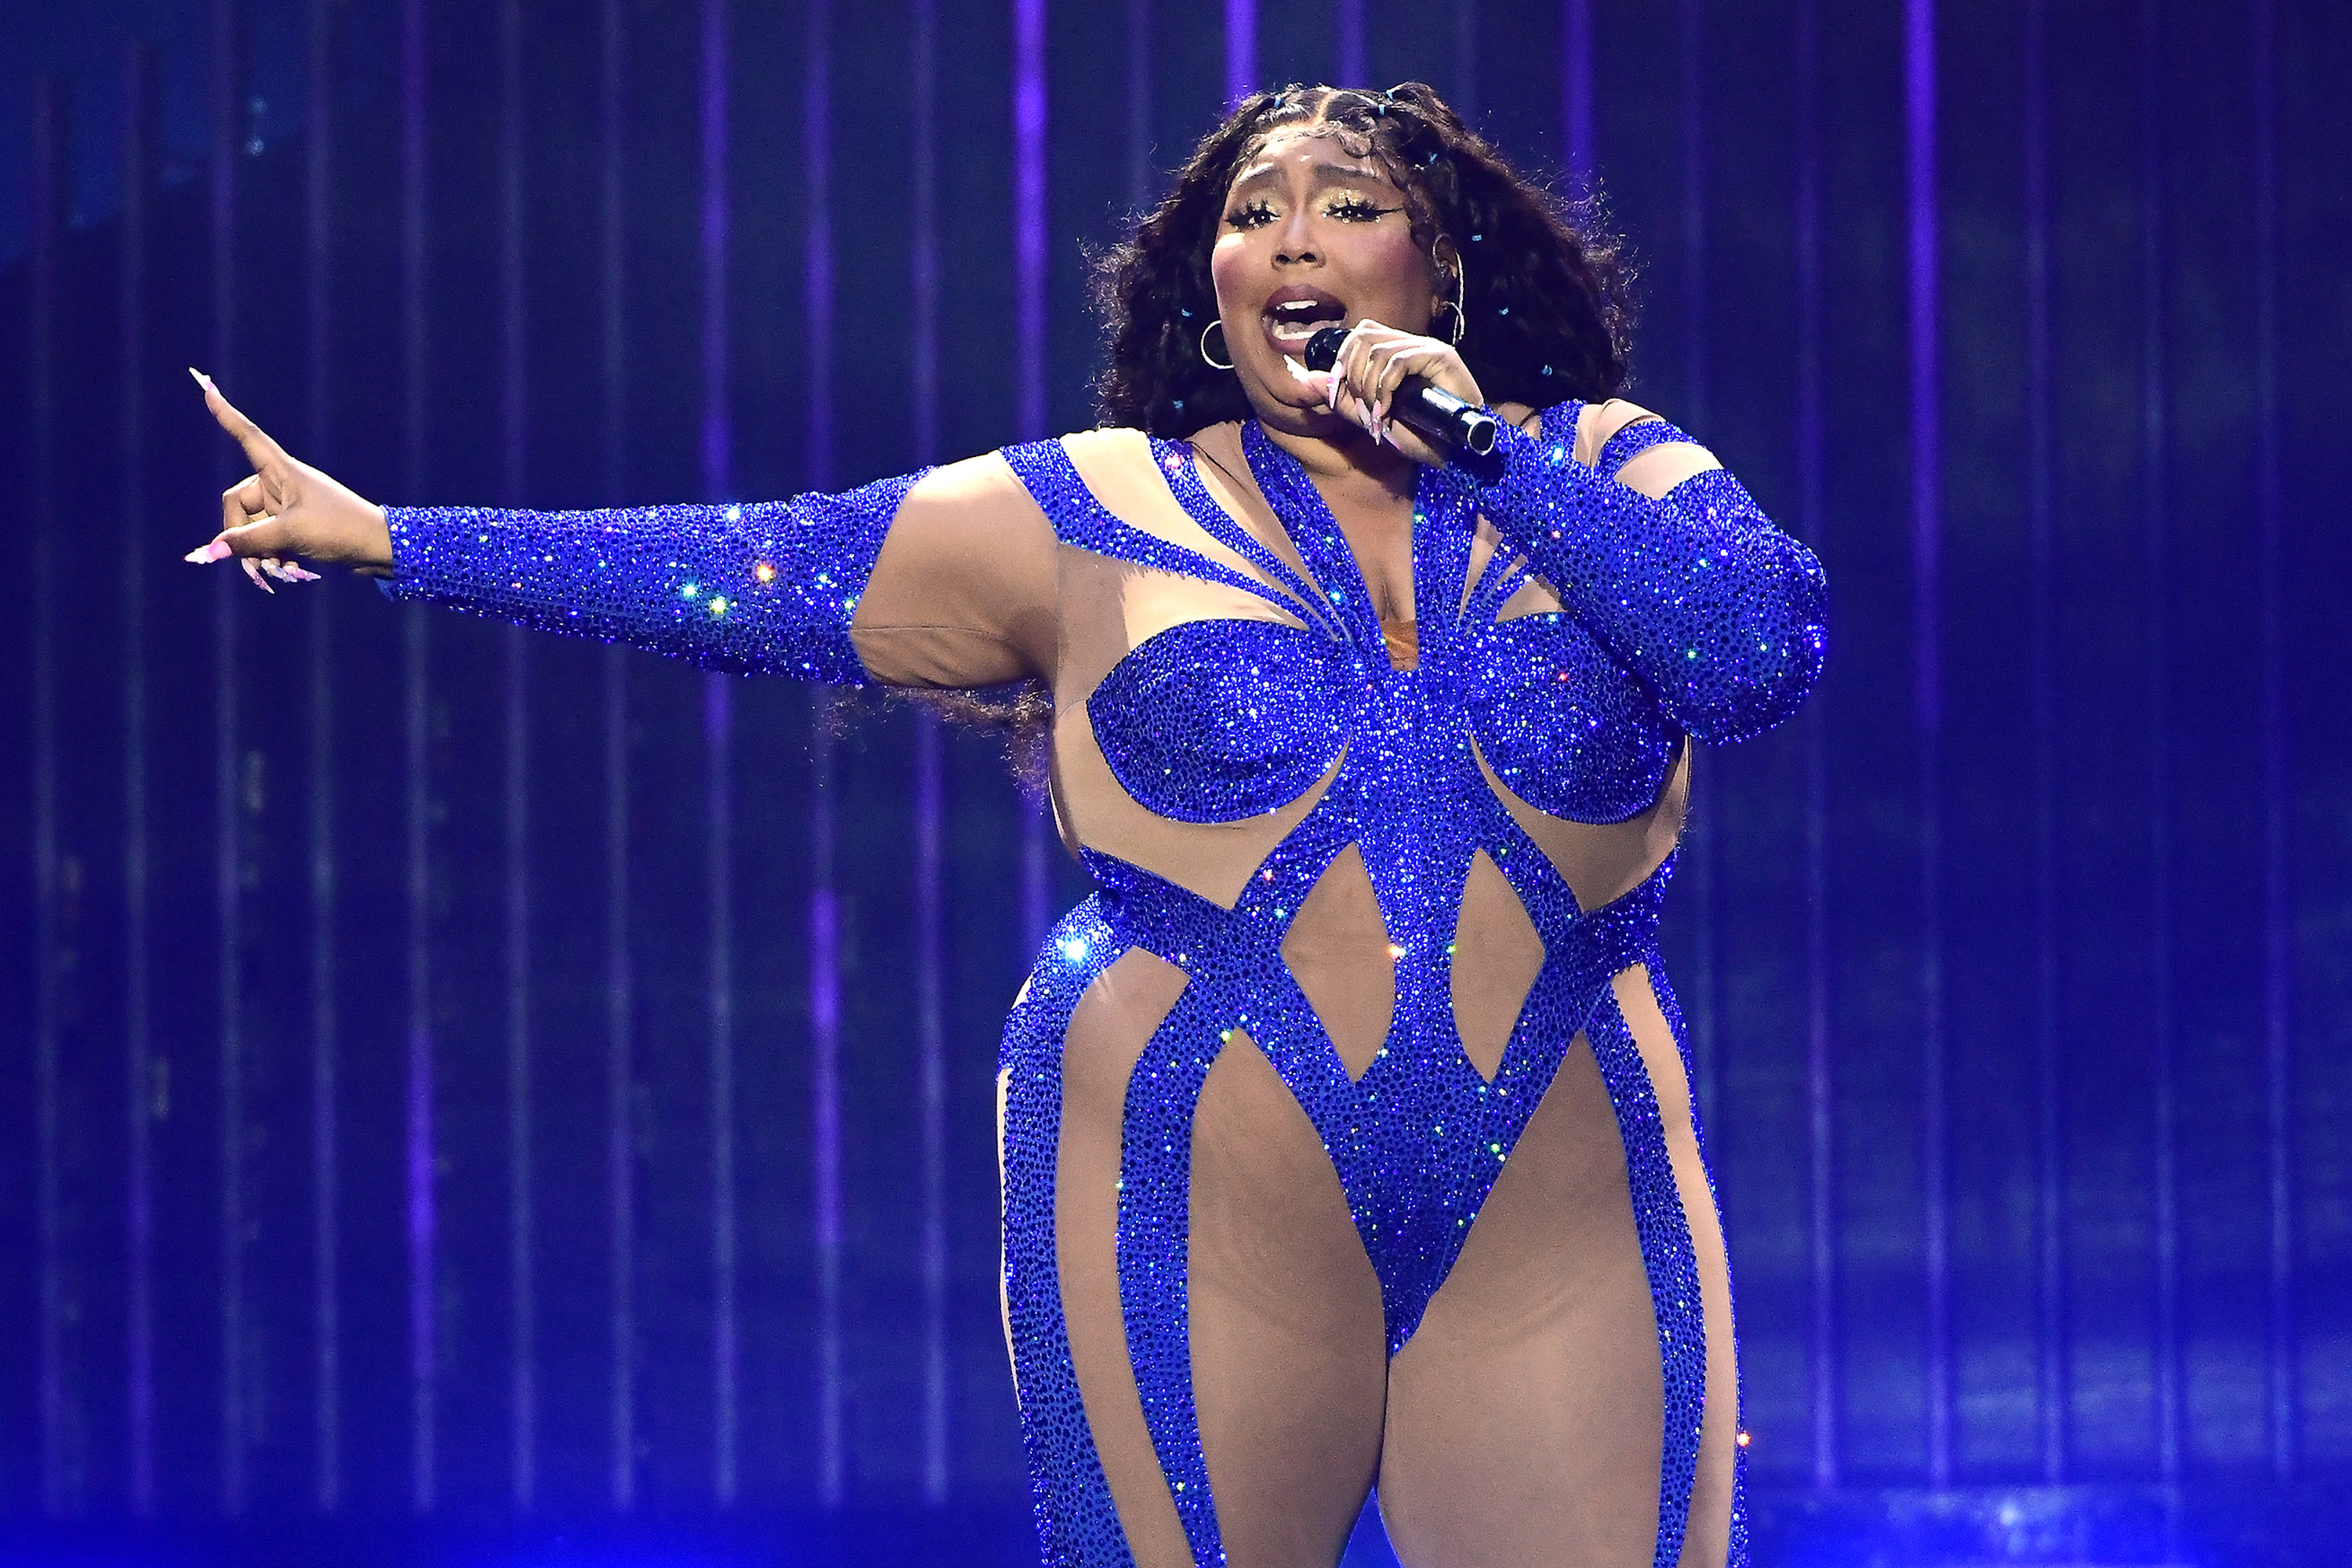 Lizzo onstage in a leotard